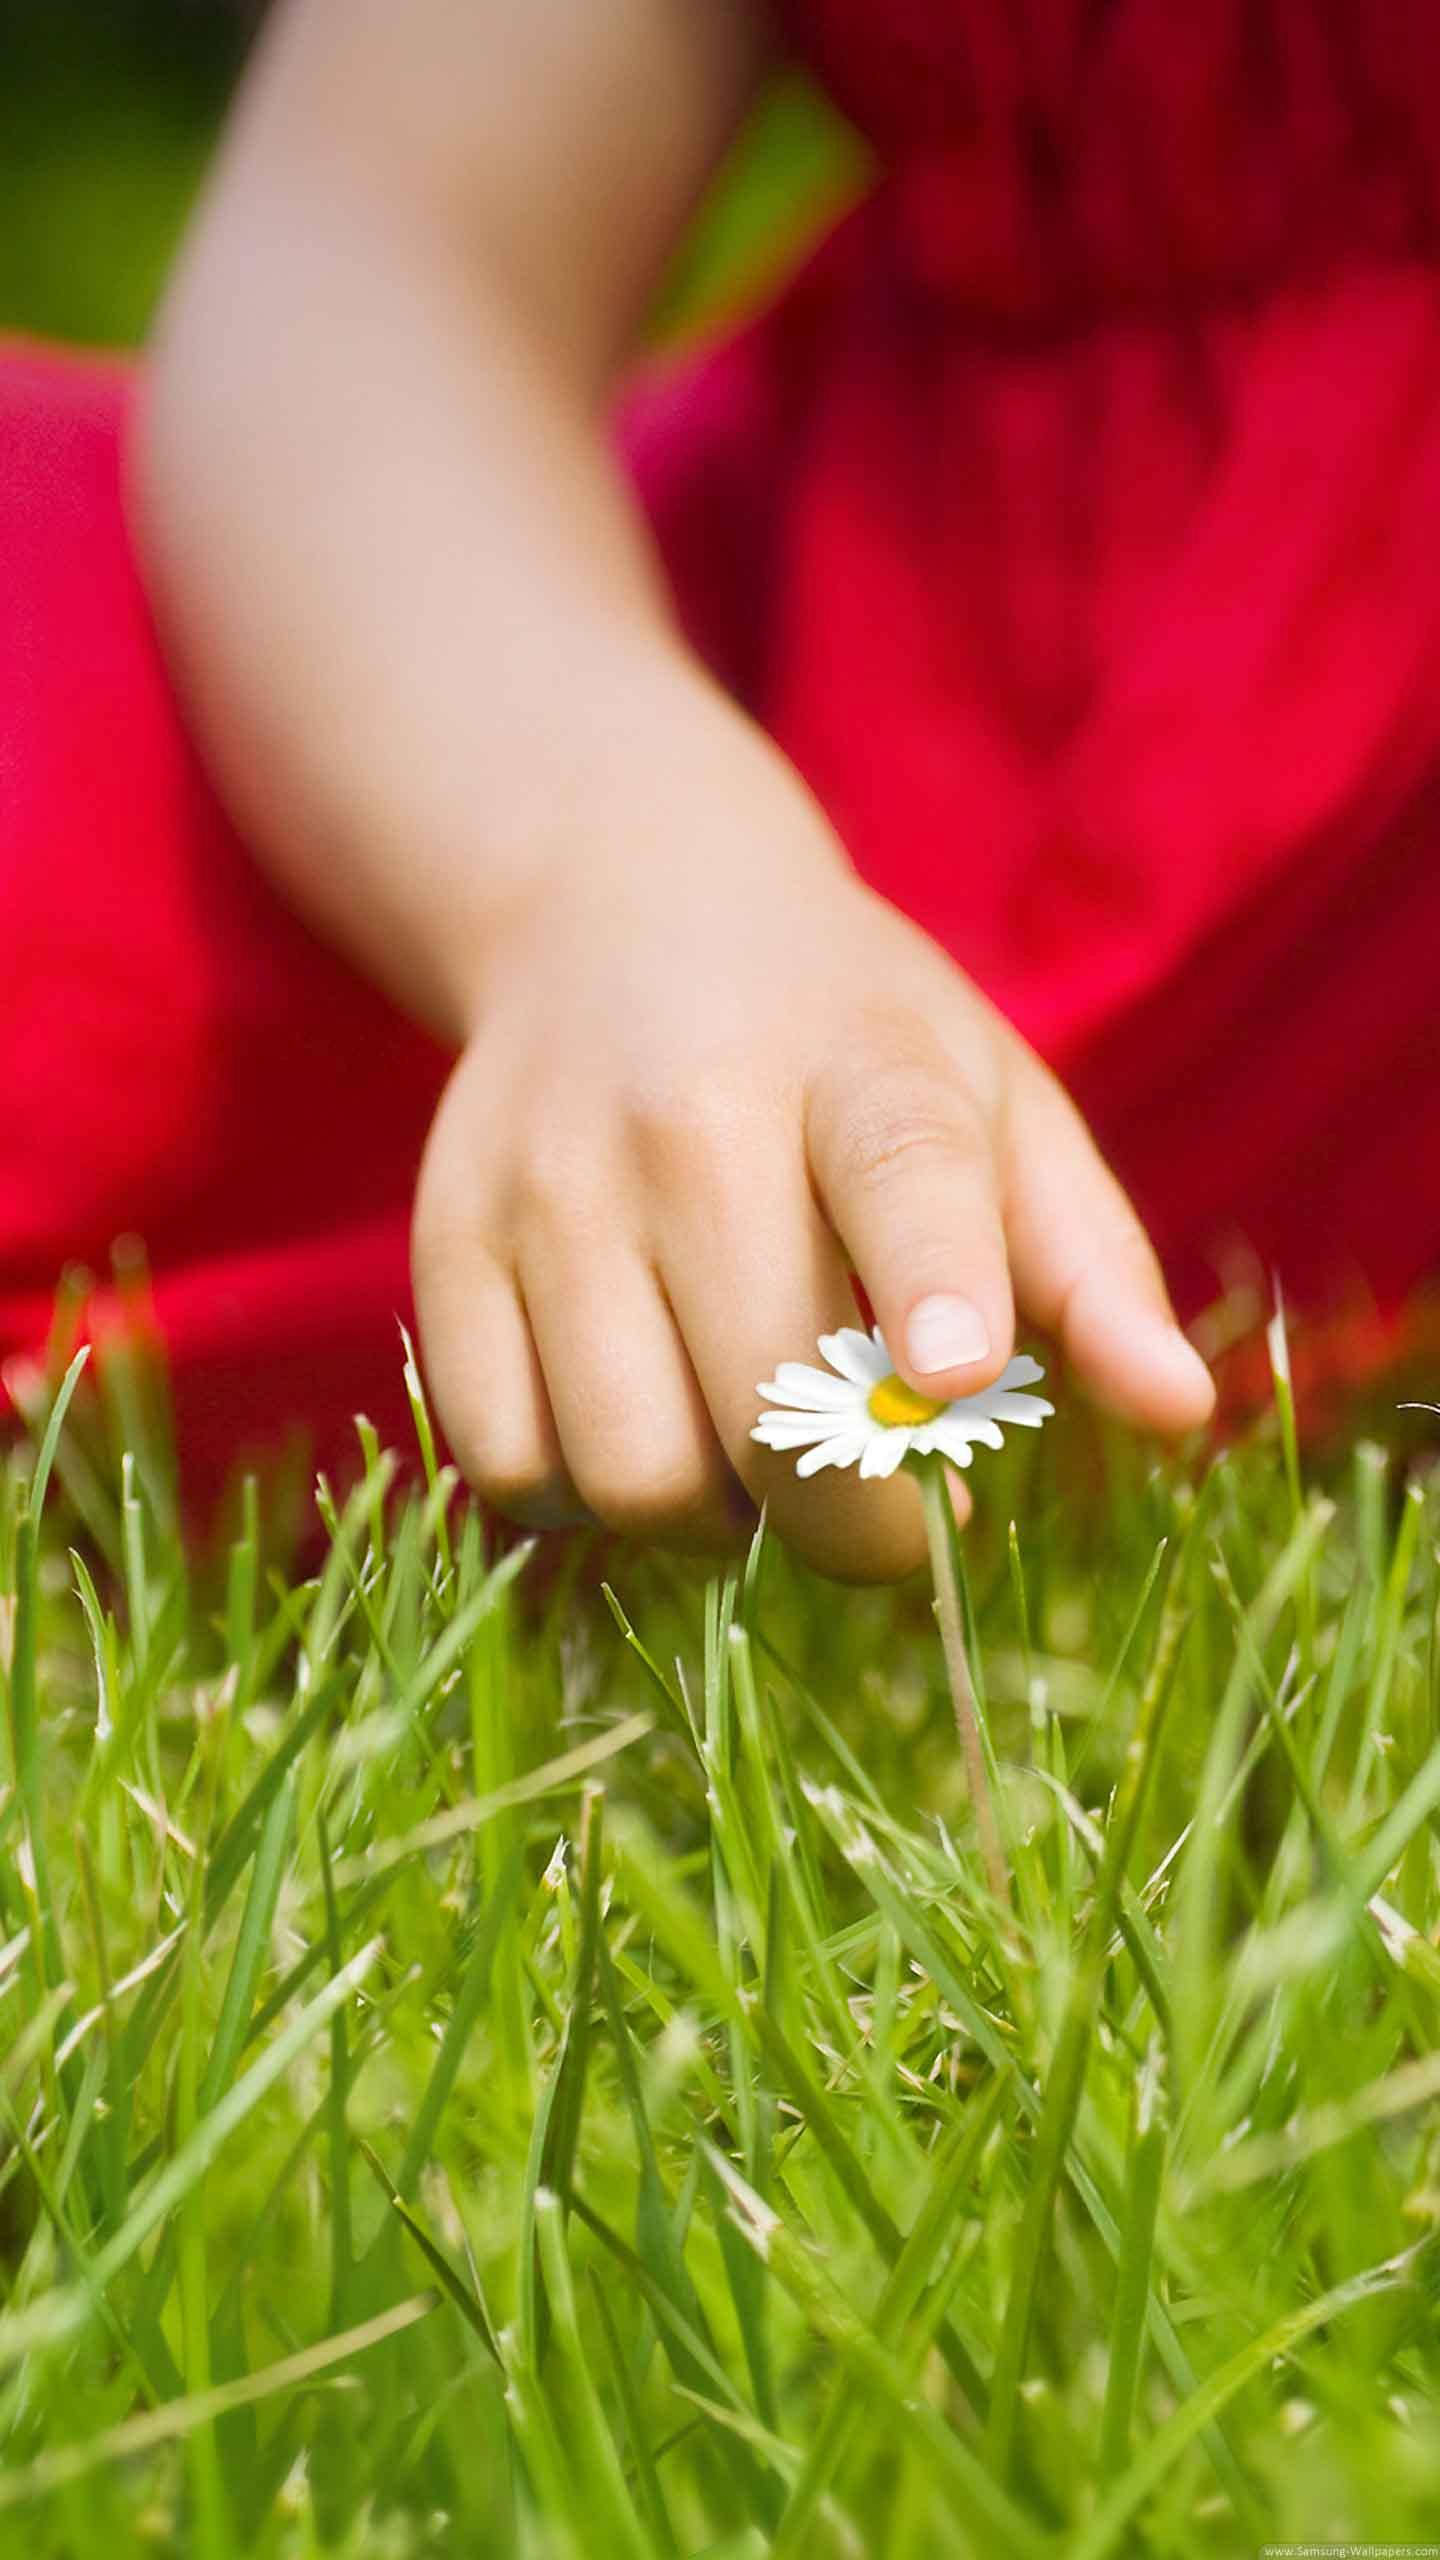 live lock screen wallpaper,people in nature,grass,hand,nail,finger